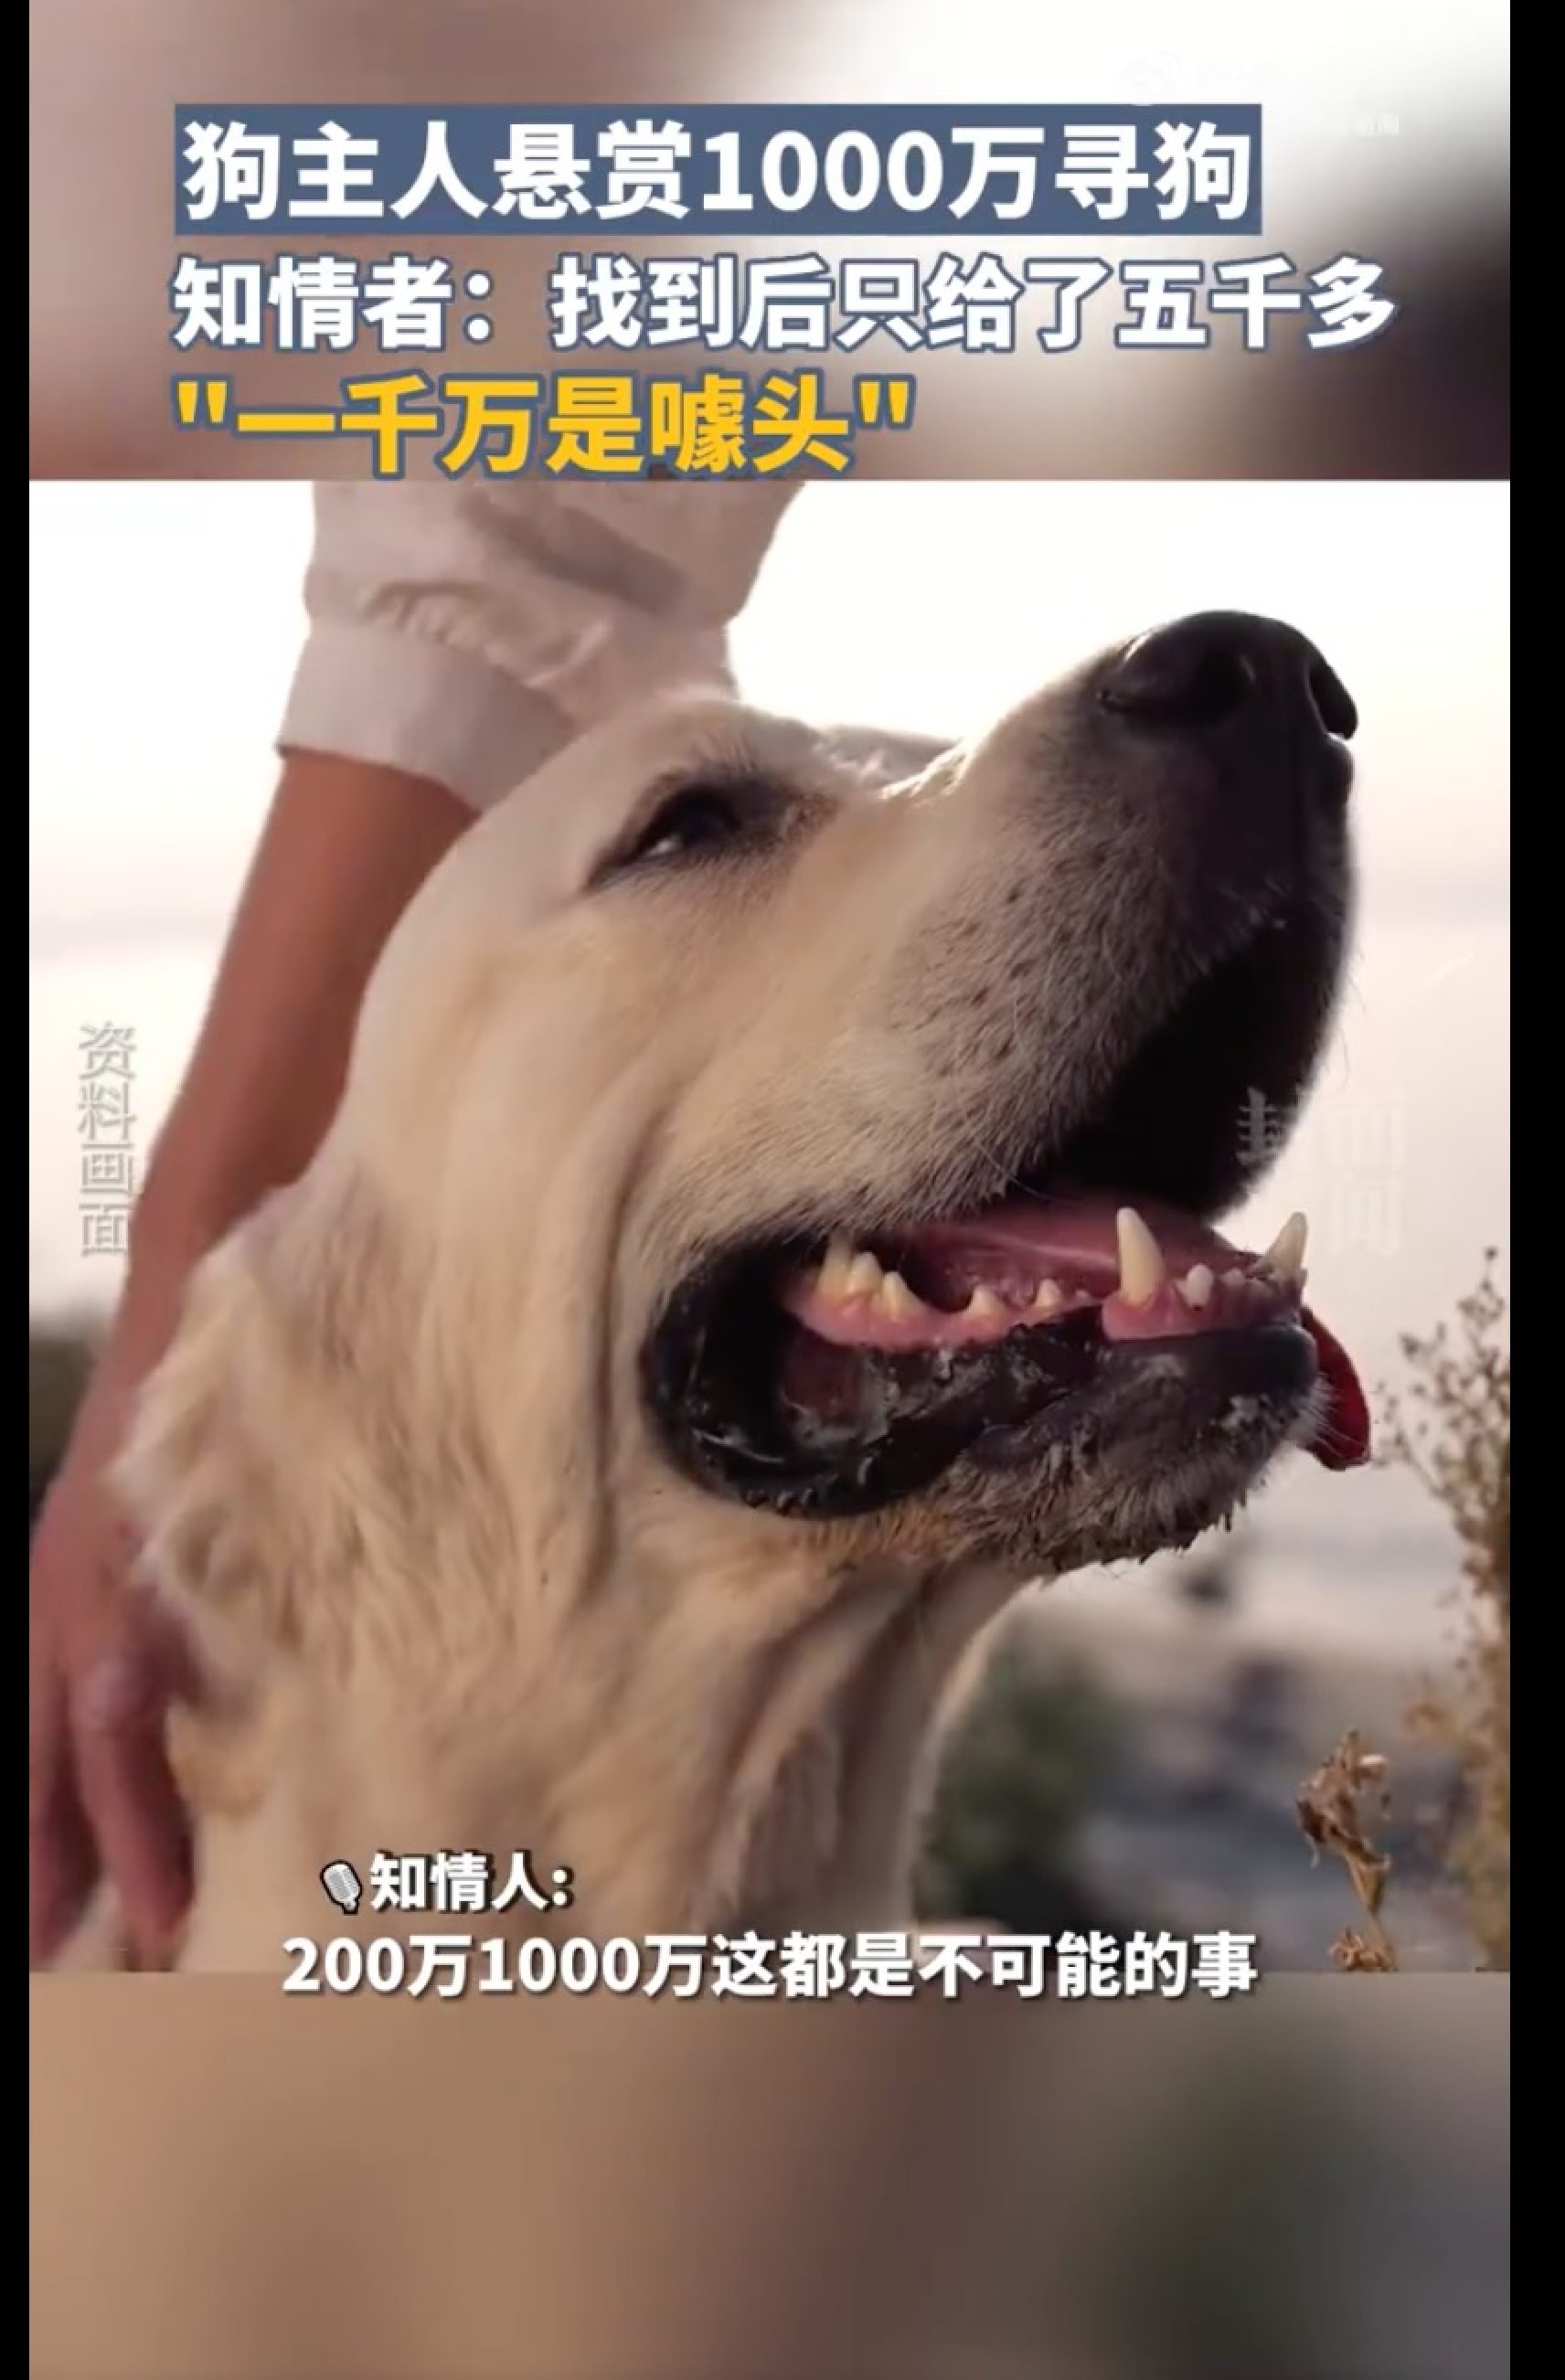 The missing canine was found within 24 hours, largely thanks to the huge amount being offered for its return. Photo: Weibo